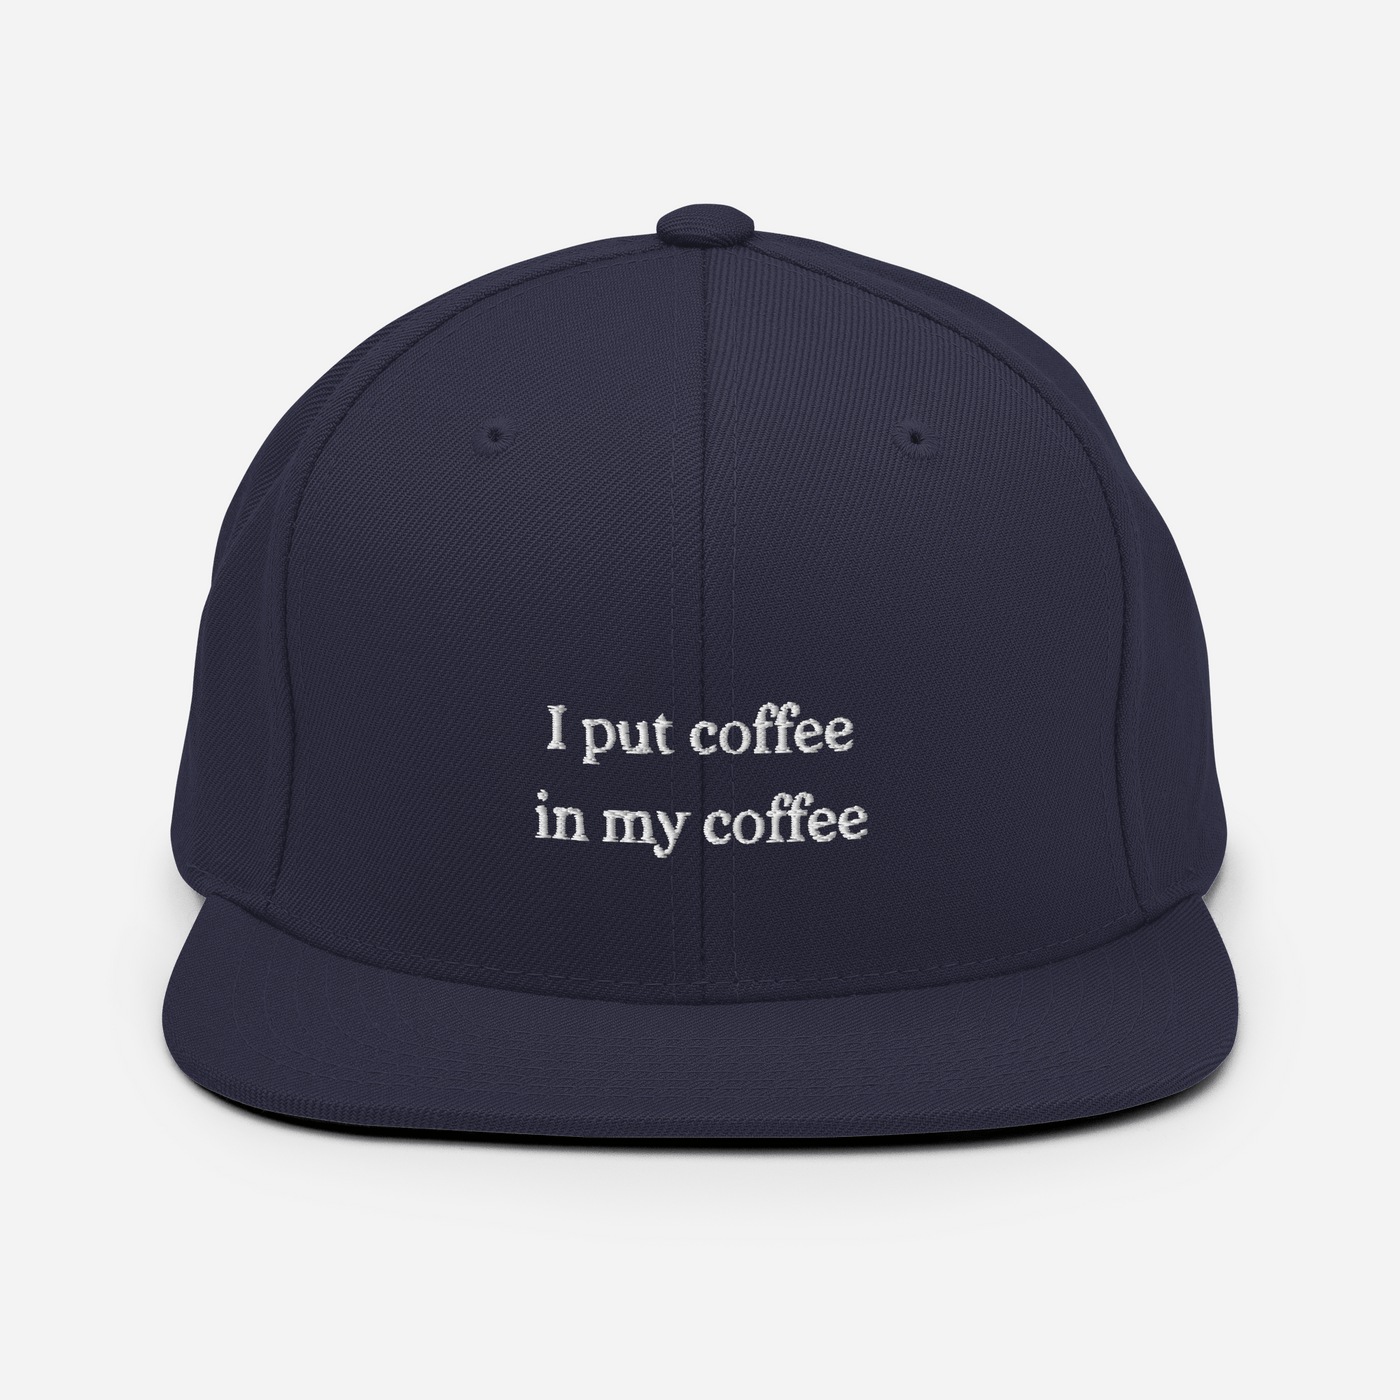 I put coffee in my coffee Snapback Hat - Navy - - Just Another Cap Store